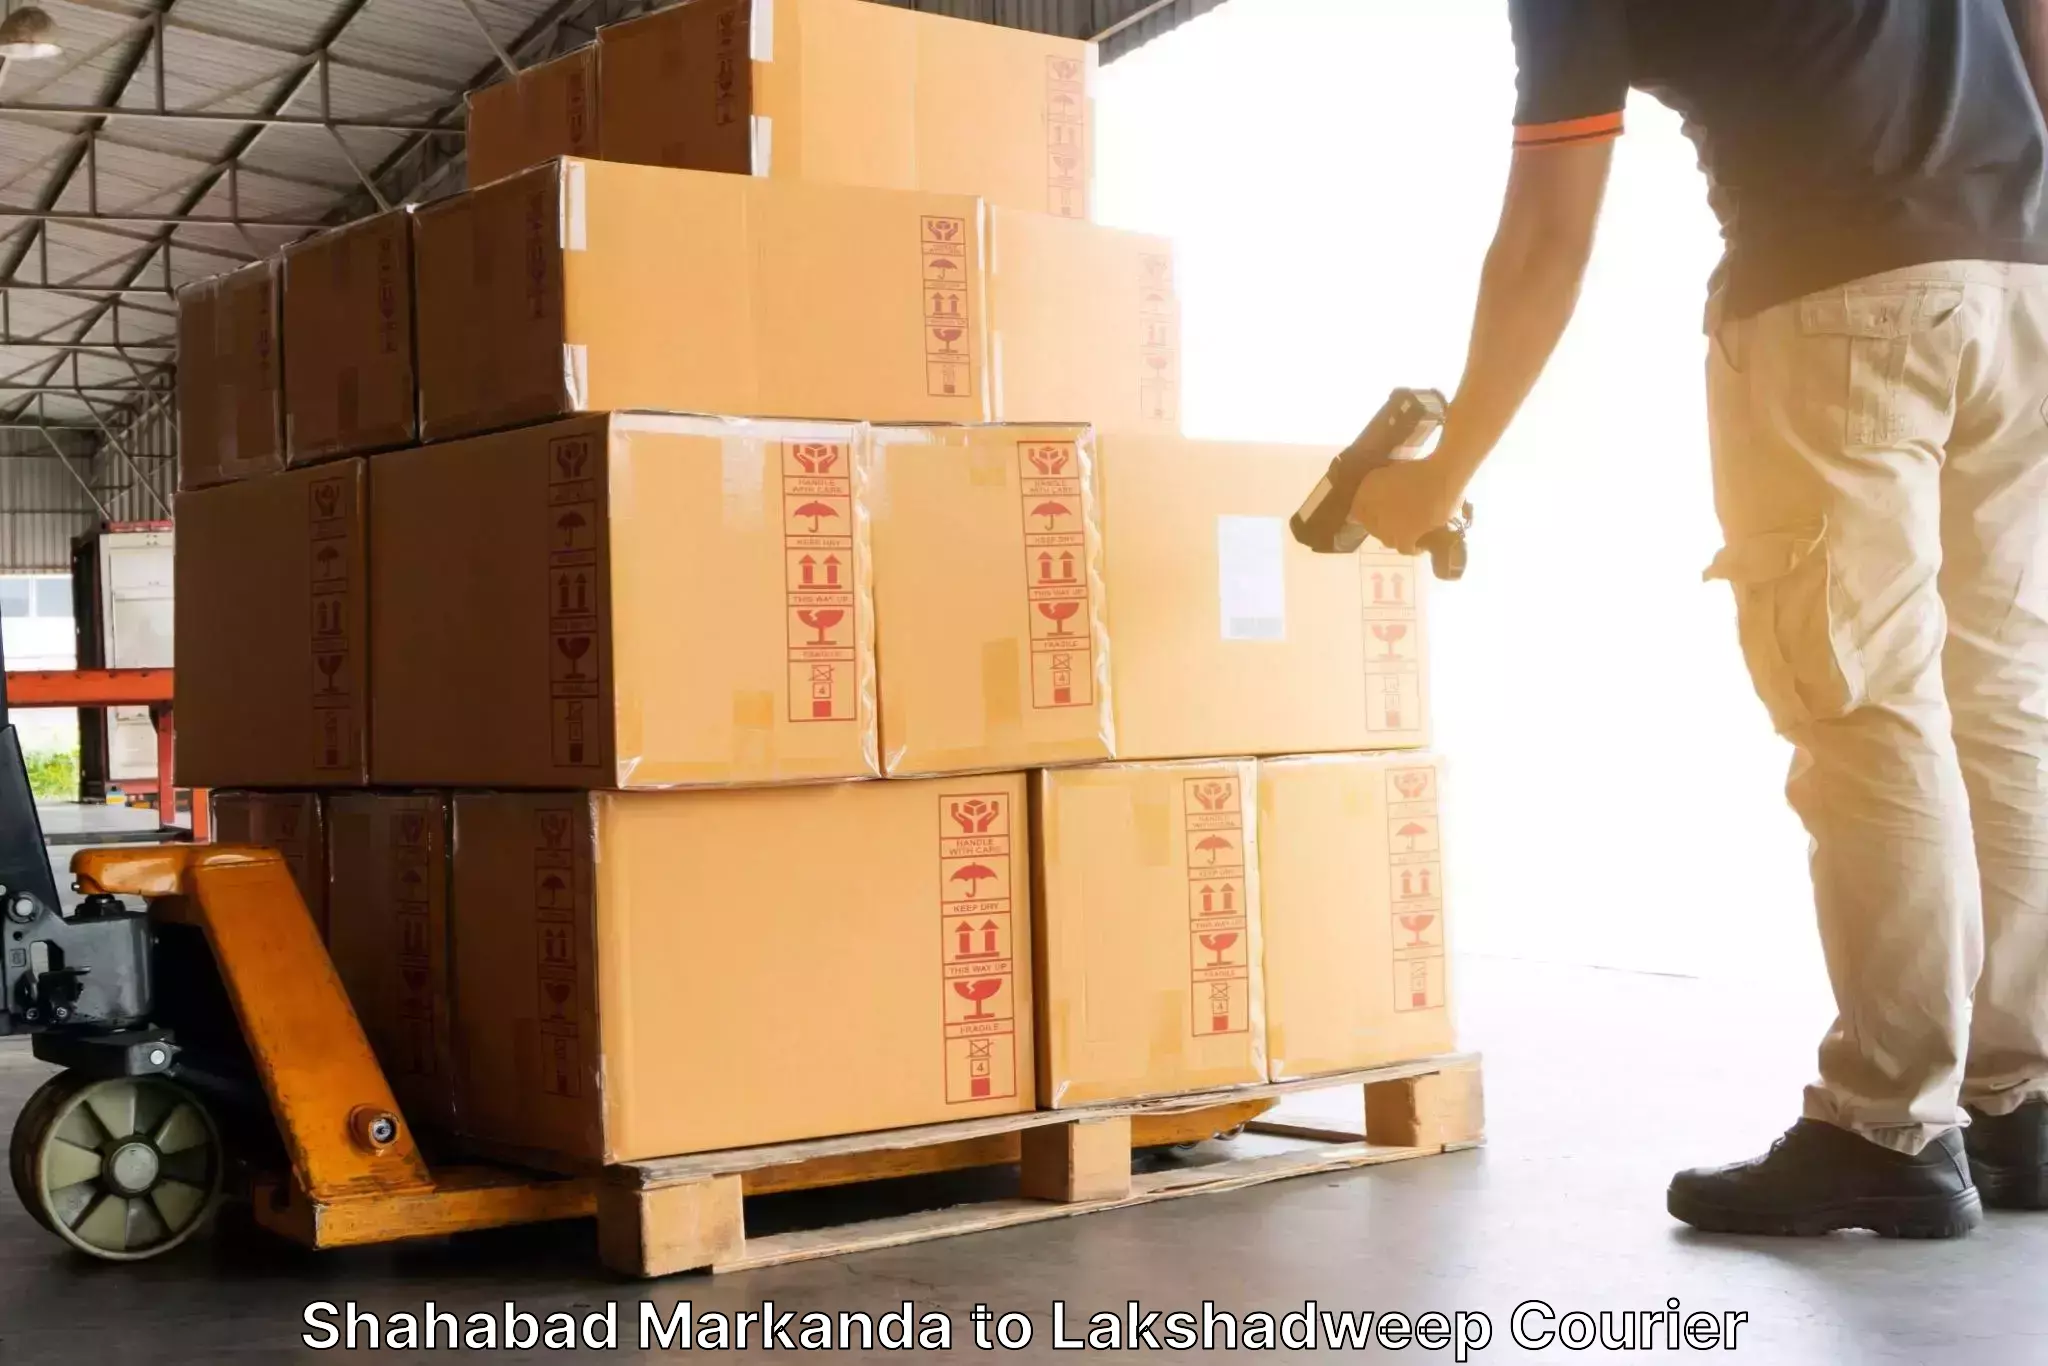 Residential courier service in Shahabad Markanda to Lakshadweep